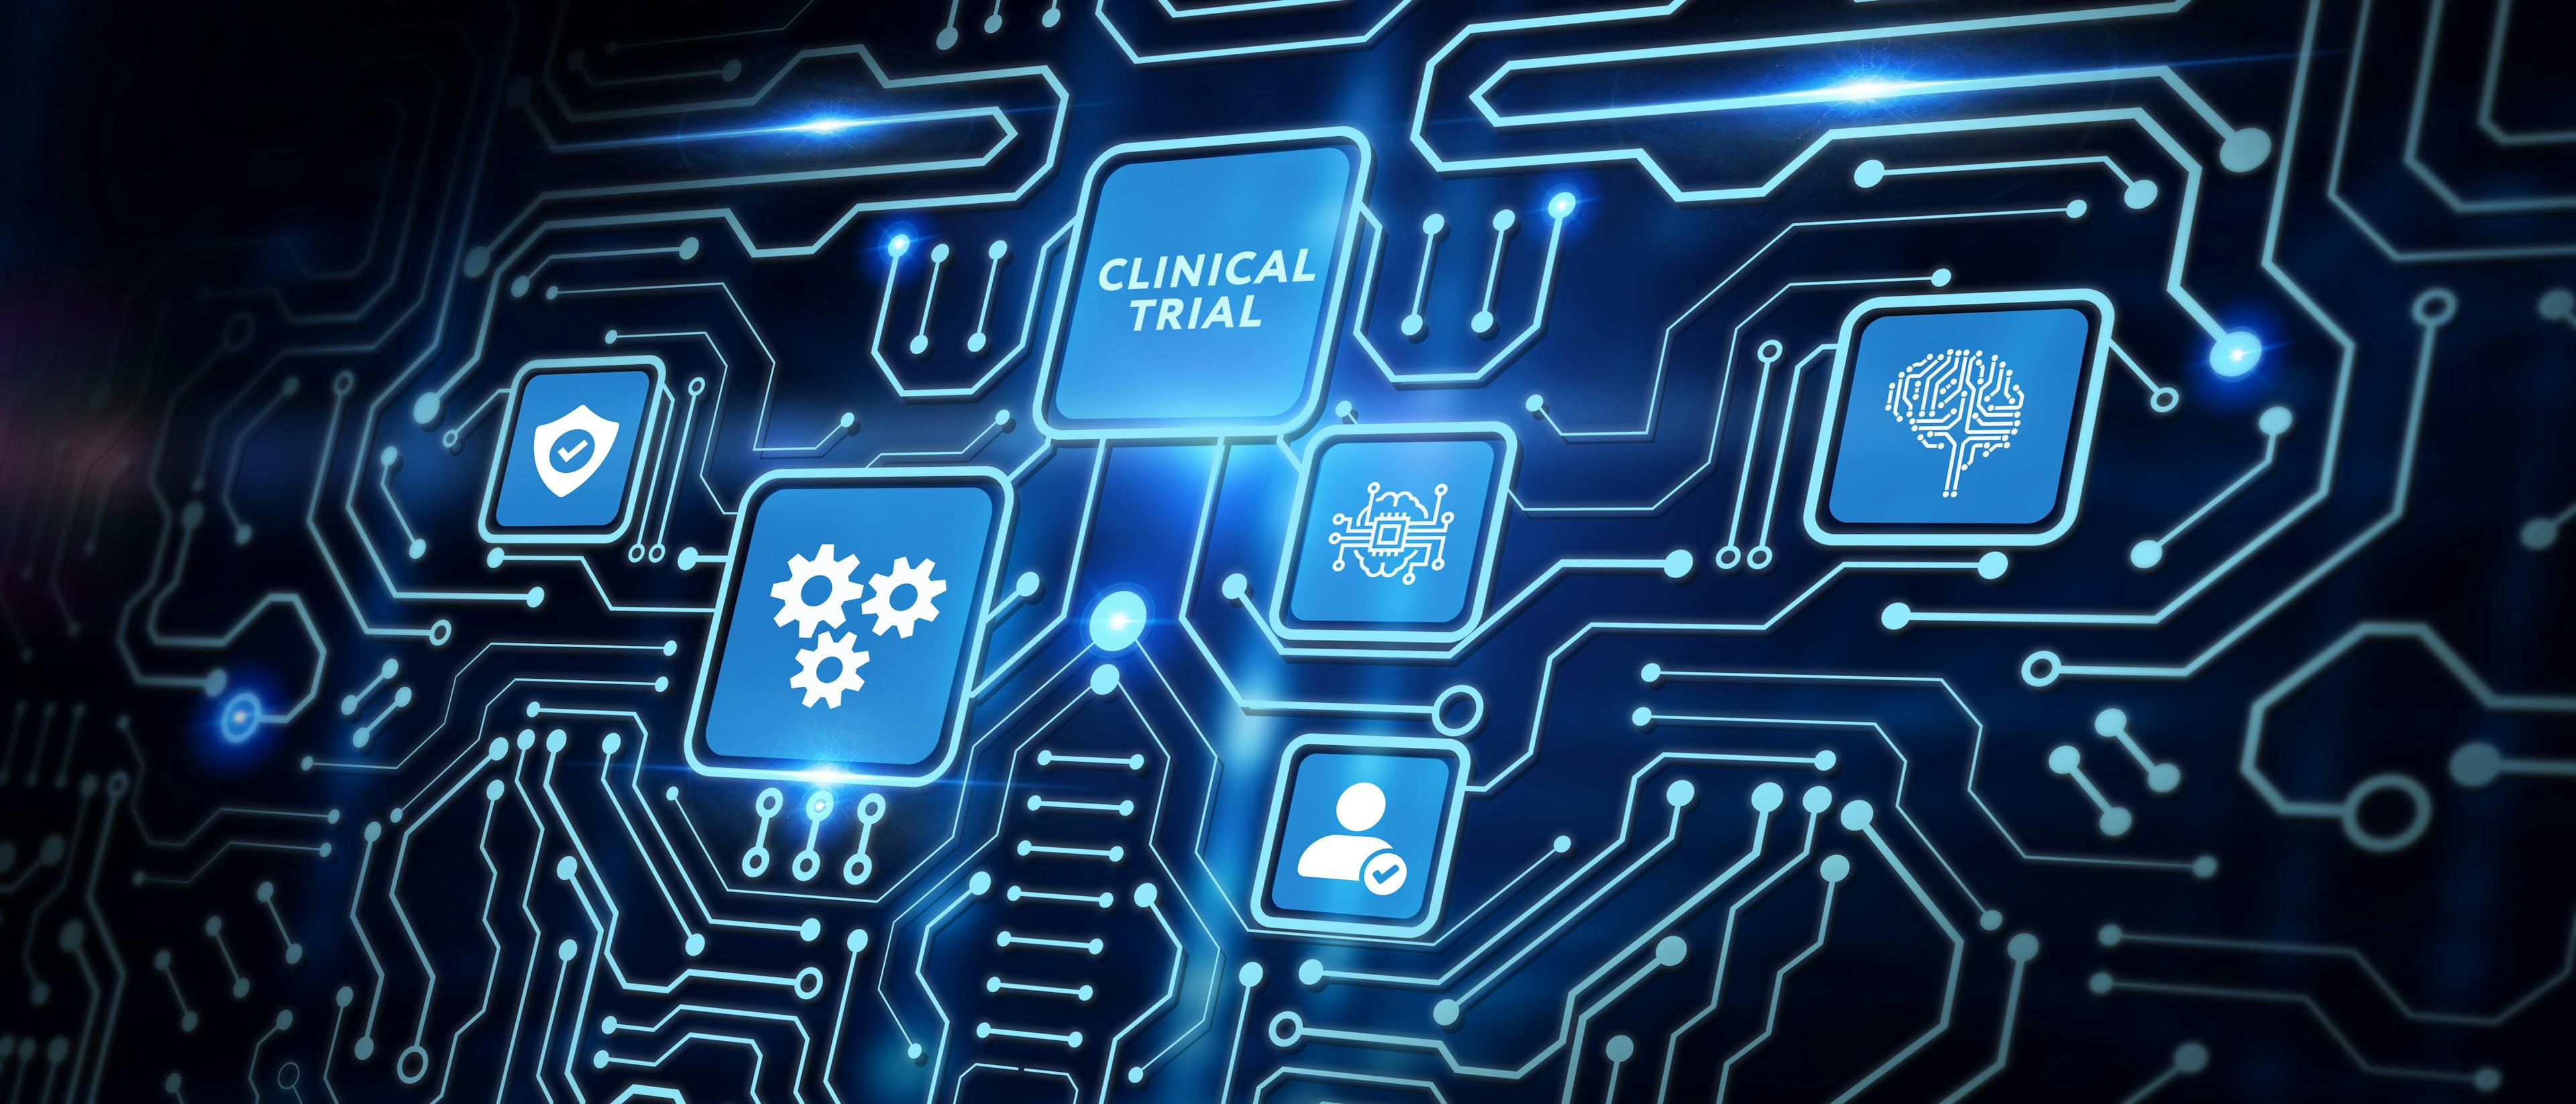 Outsourcing in Clinical Trials: Medical Devices Europe 2023 (2/21/23 - 2/22/23)